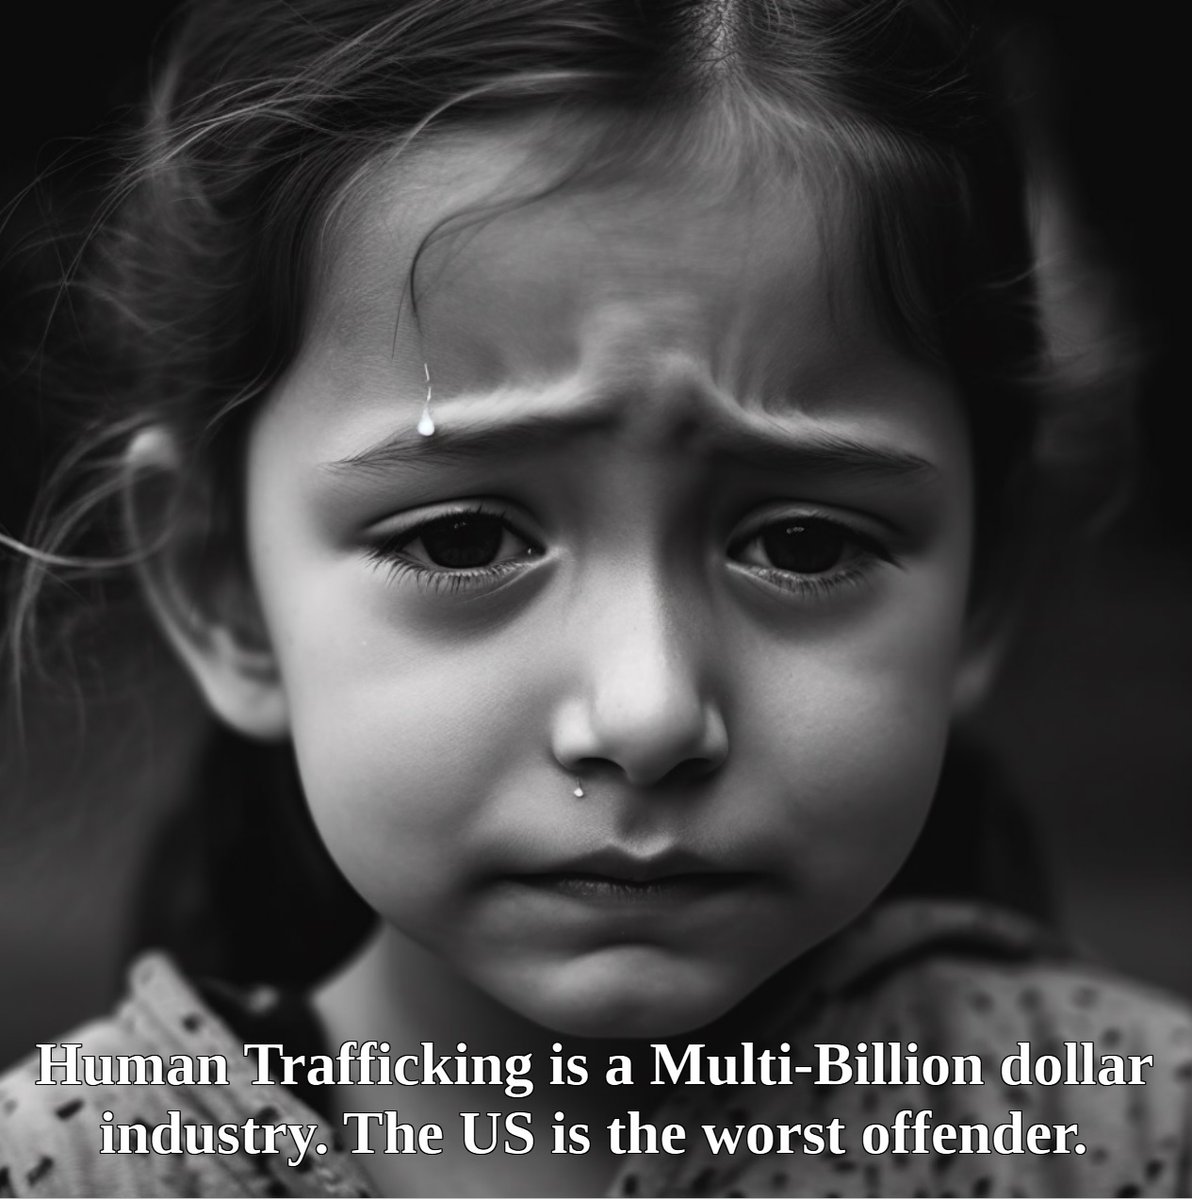 If we don't #RiseUp and #StandUP for the children, who will? End #ChildTrafficking  #ProtectTheChildren
#SaveTheChildren